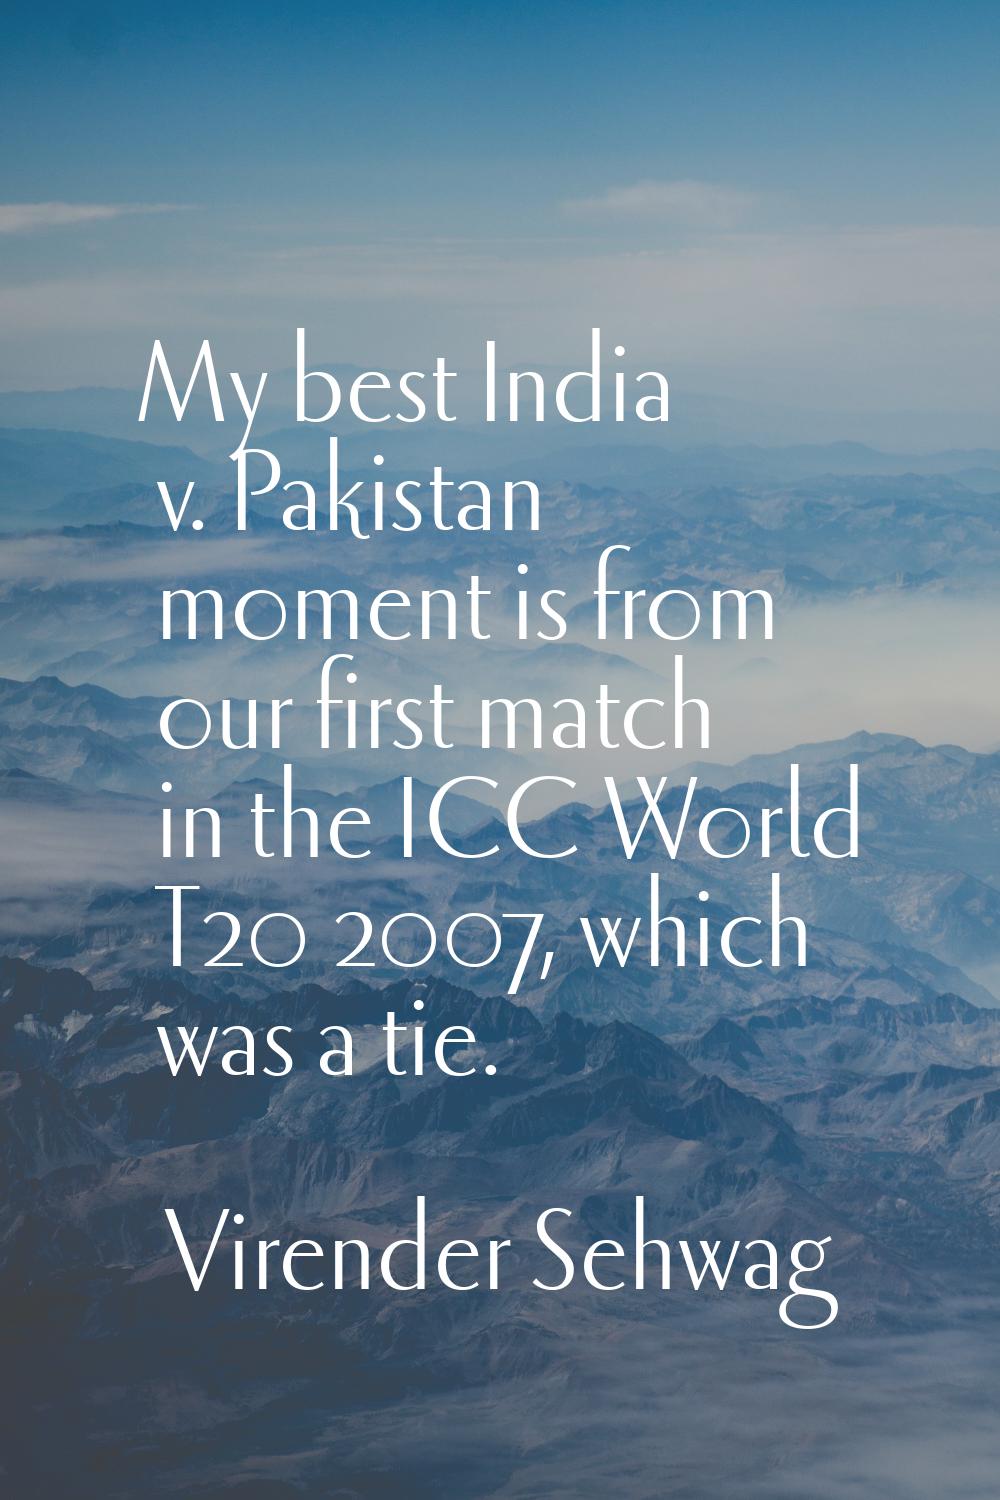 My best India v. Pakistan moment is from our first match in the ICC World T20 2007, which was a tie